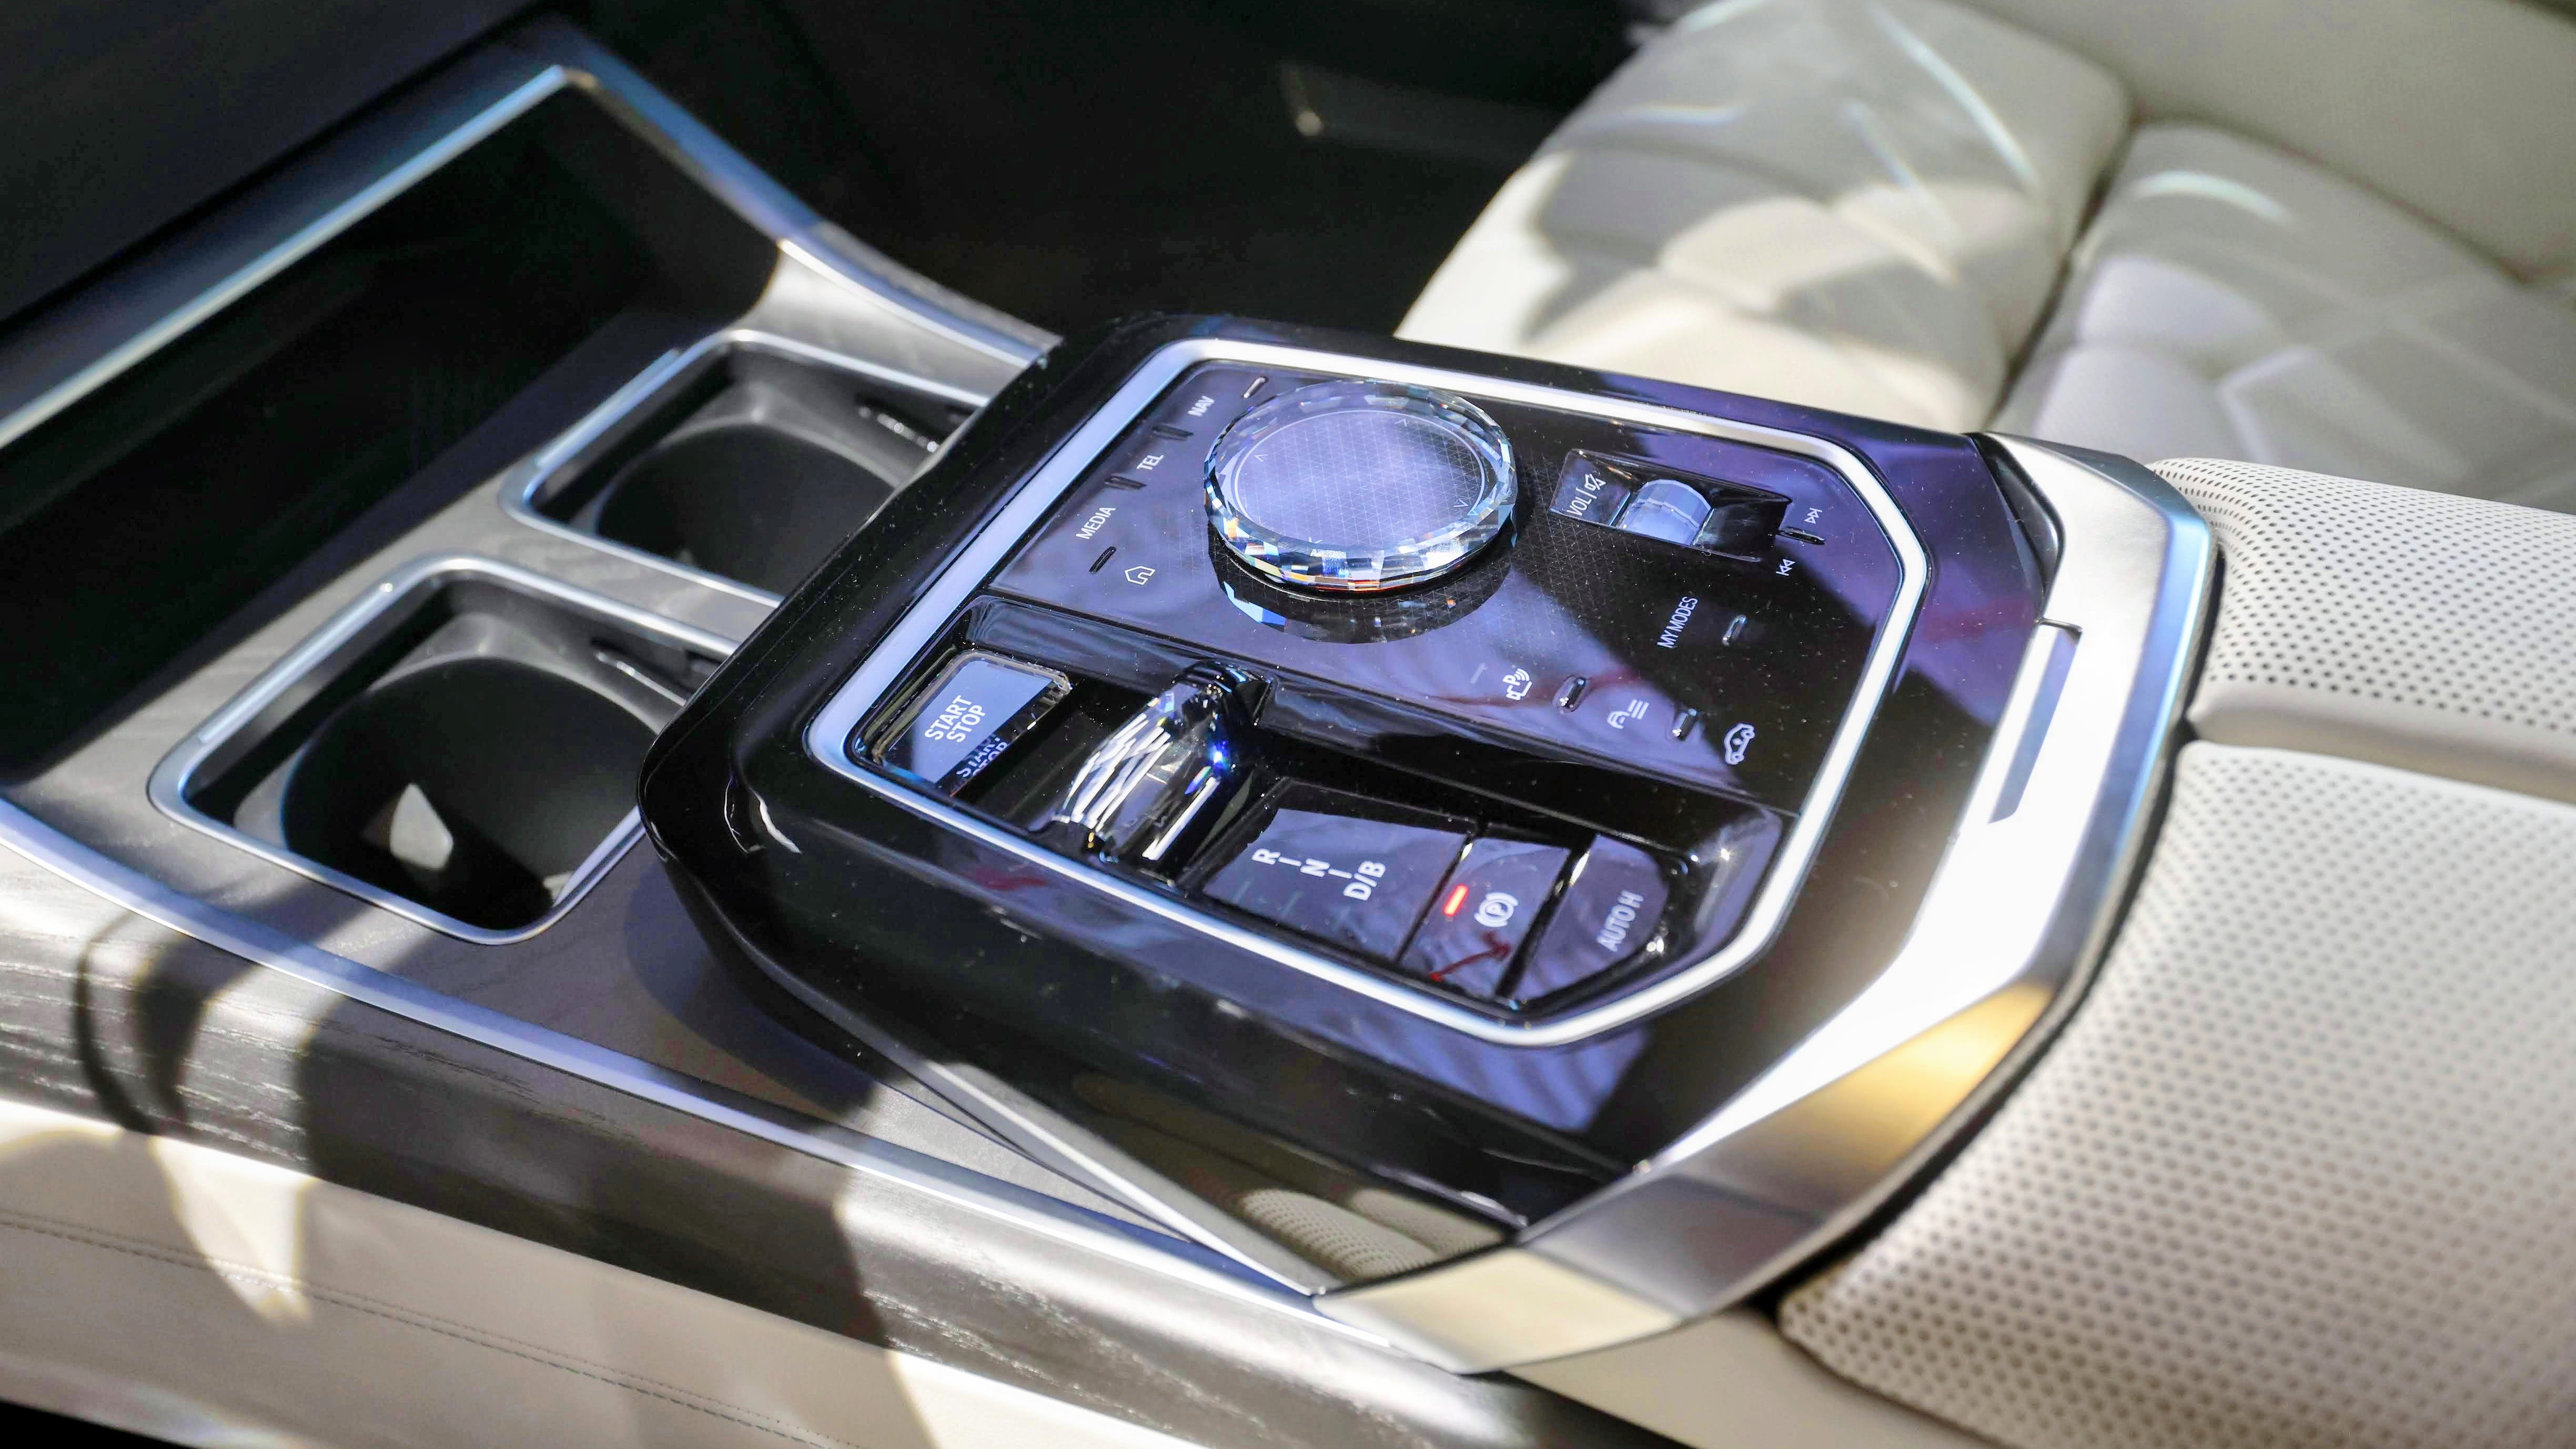 Close-up of the controls in the center console of the BMW i7